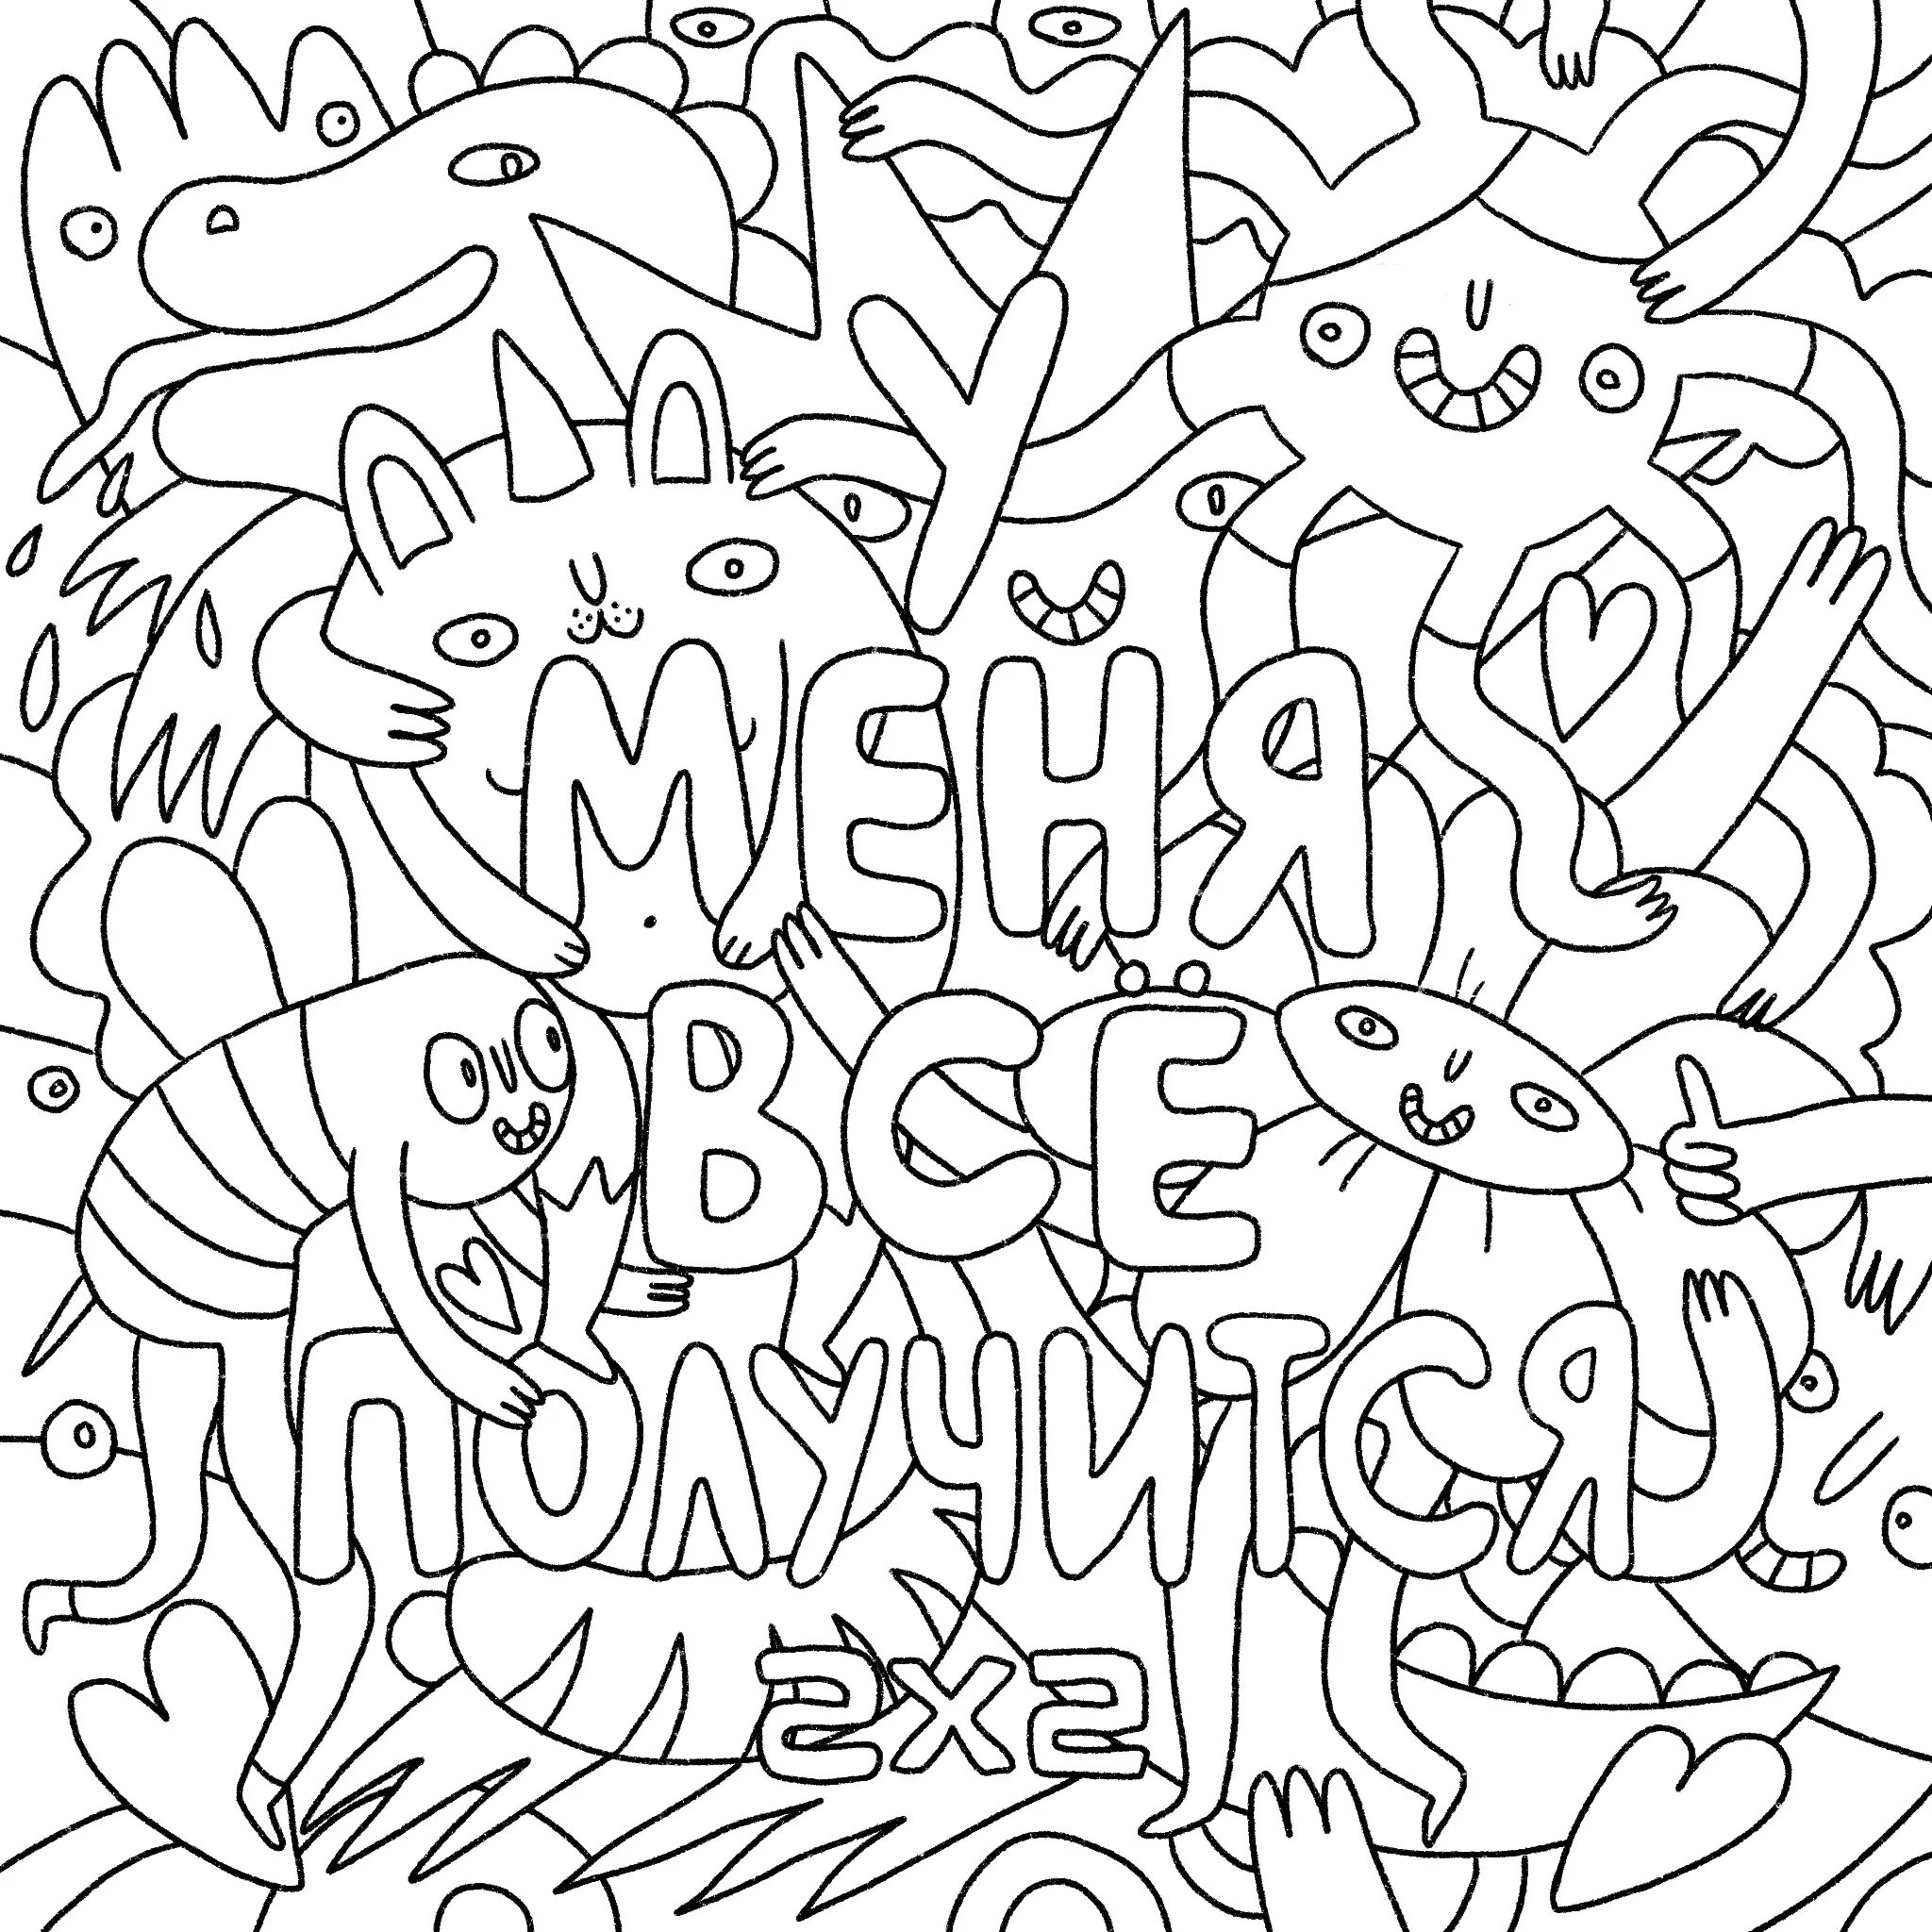 Great anti-stress coloring book with inscriptions